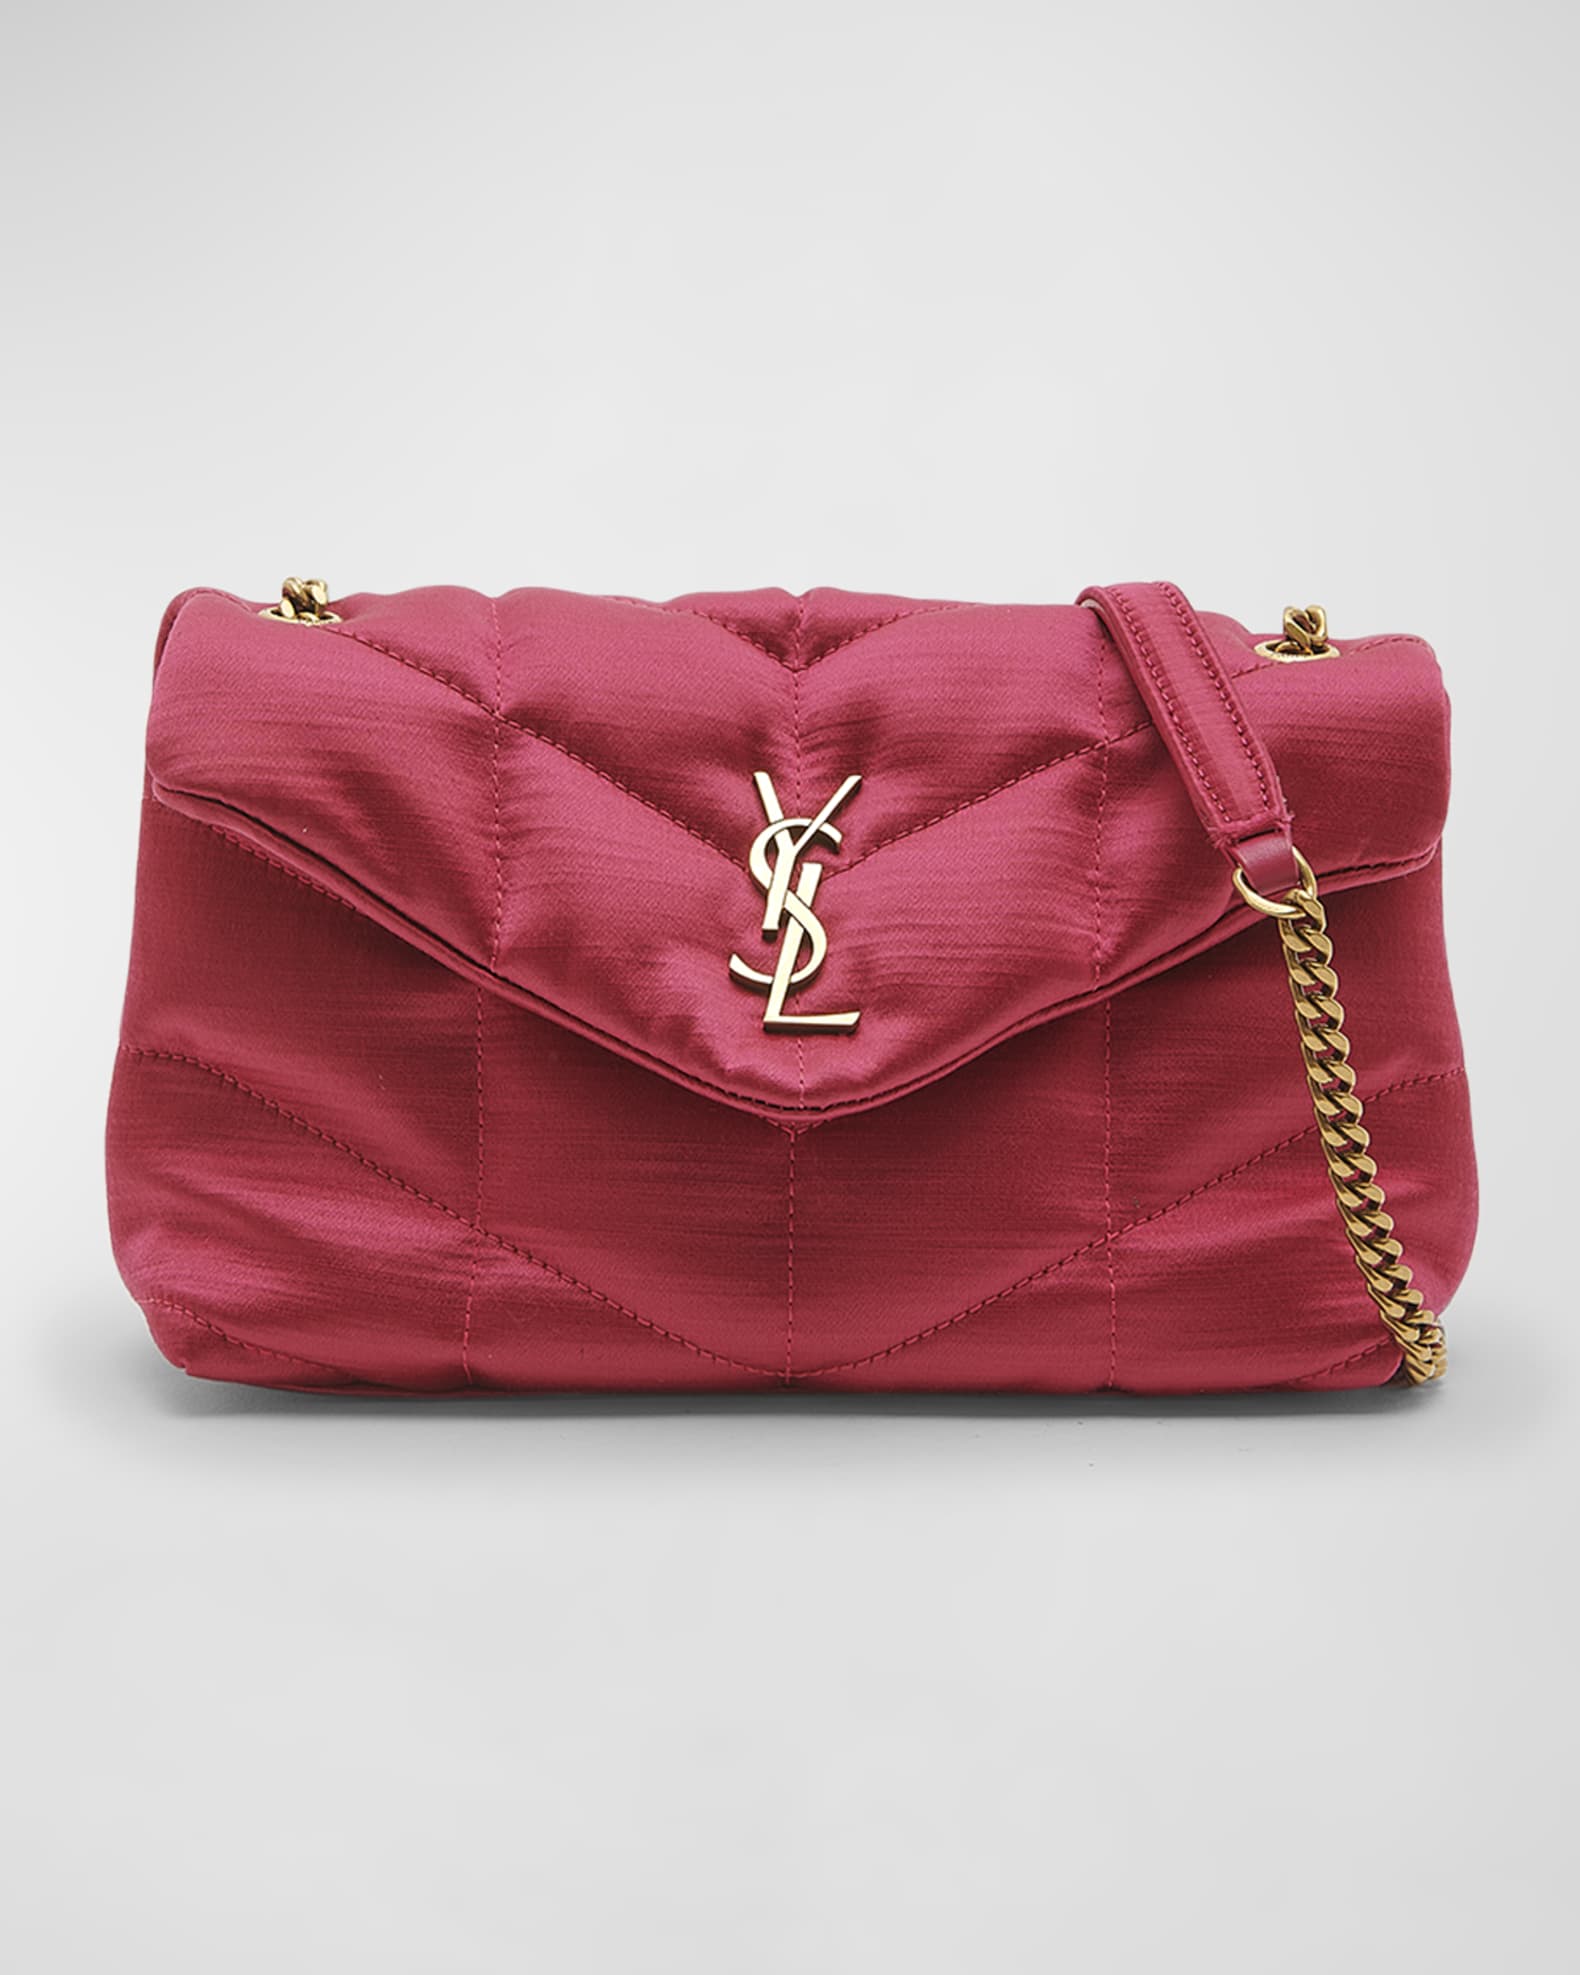 Saint Laurent Loulou Puffer Small Shoulder Bag in Red